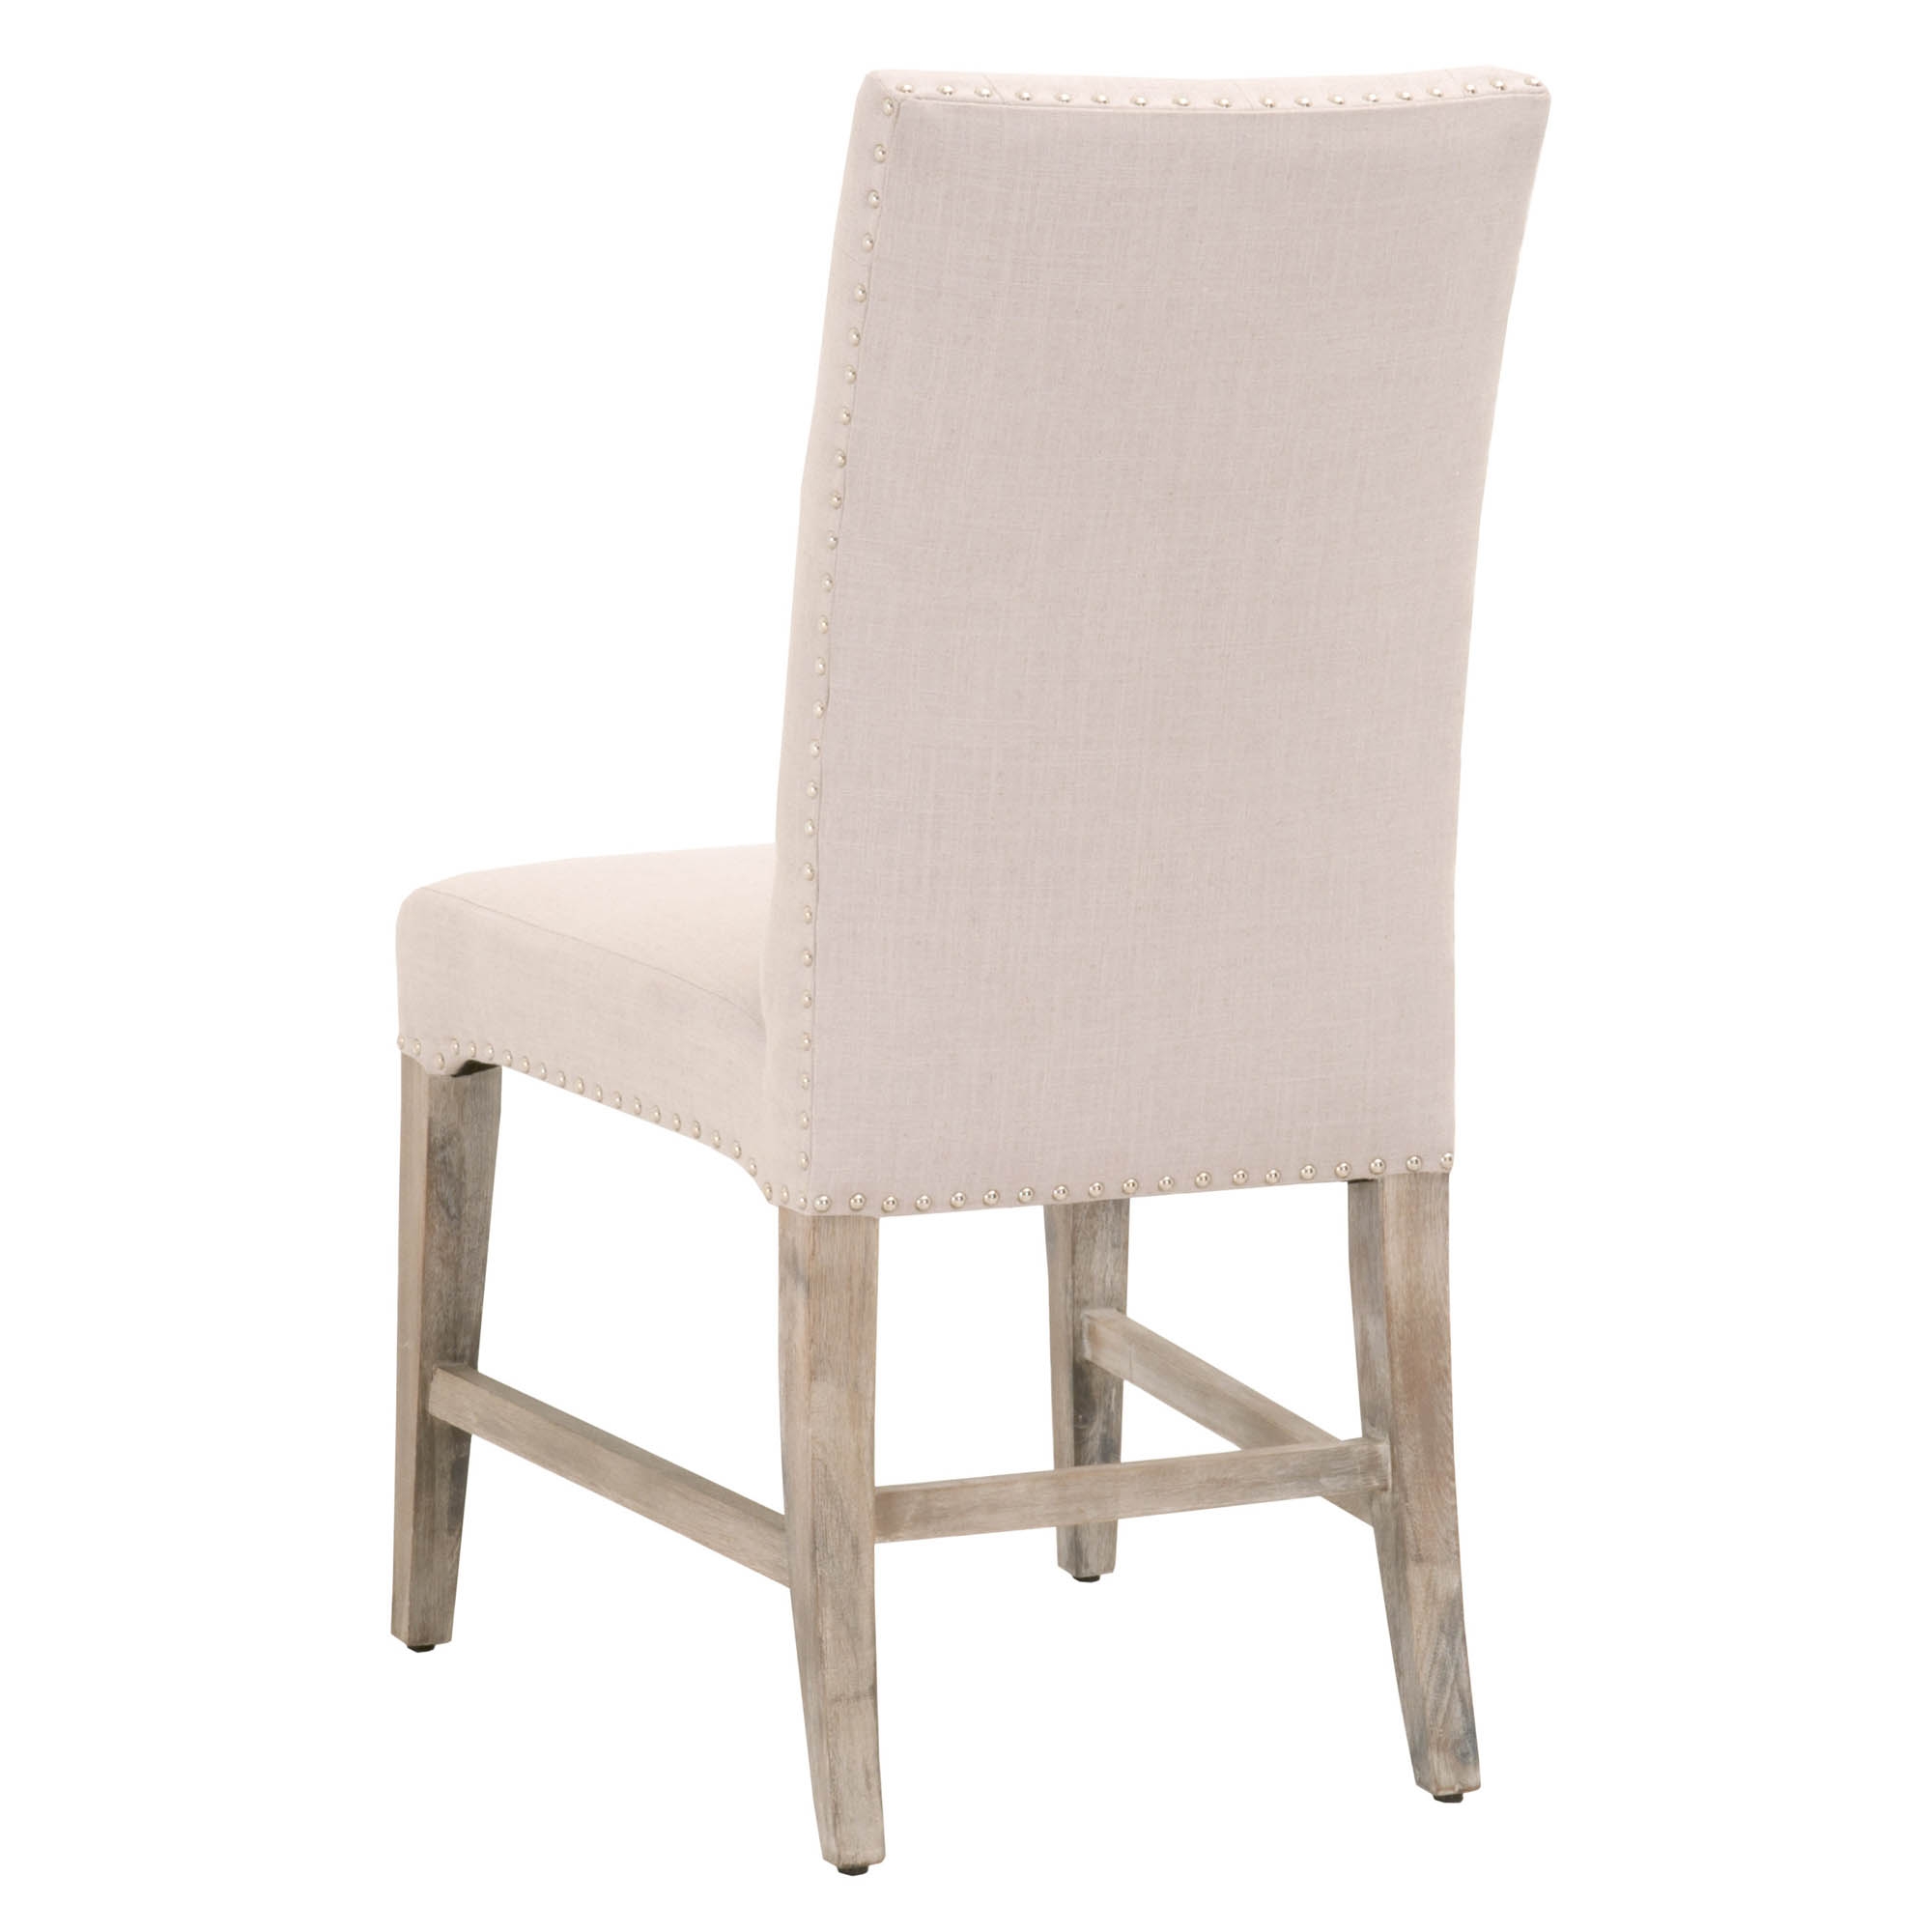 Wilshire Dining Chair, Set of 2 - Image 3